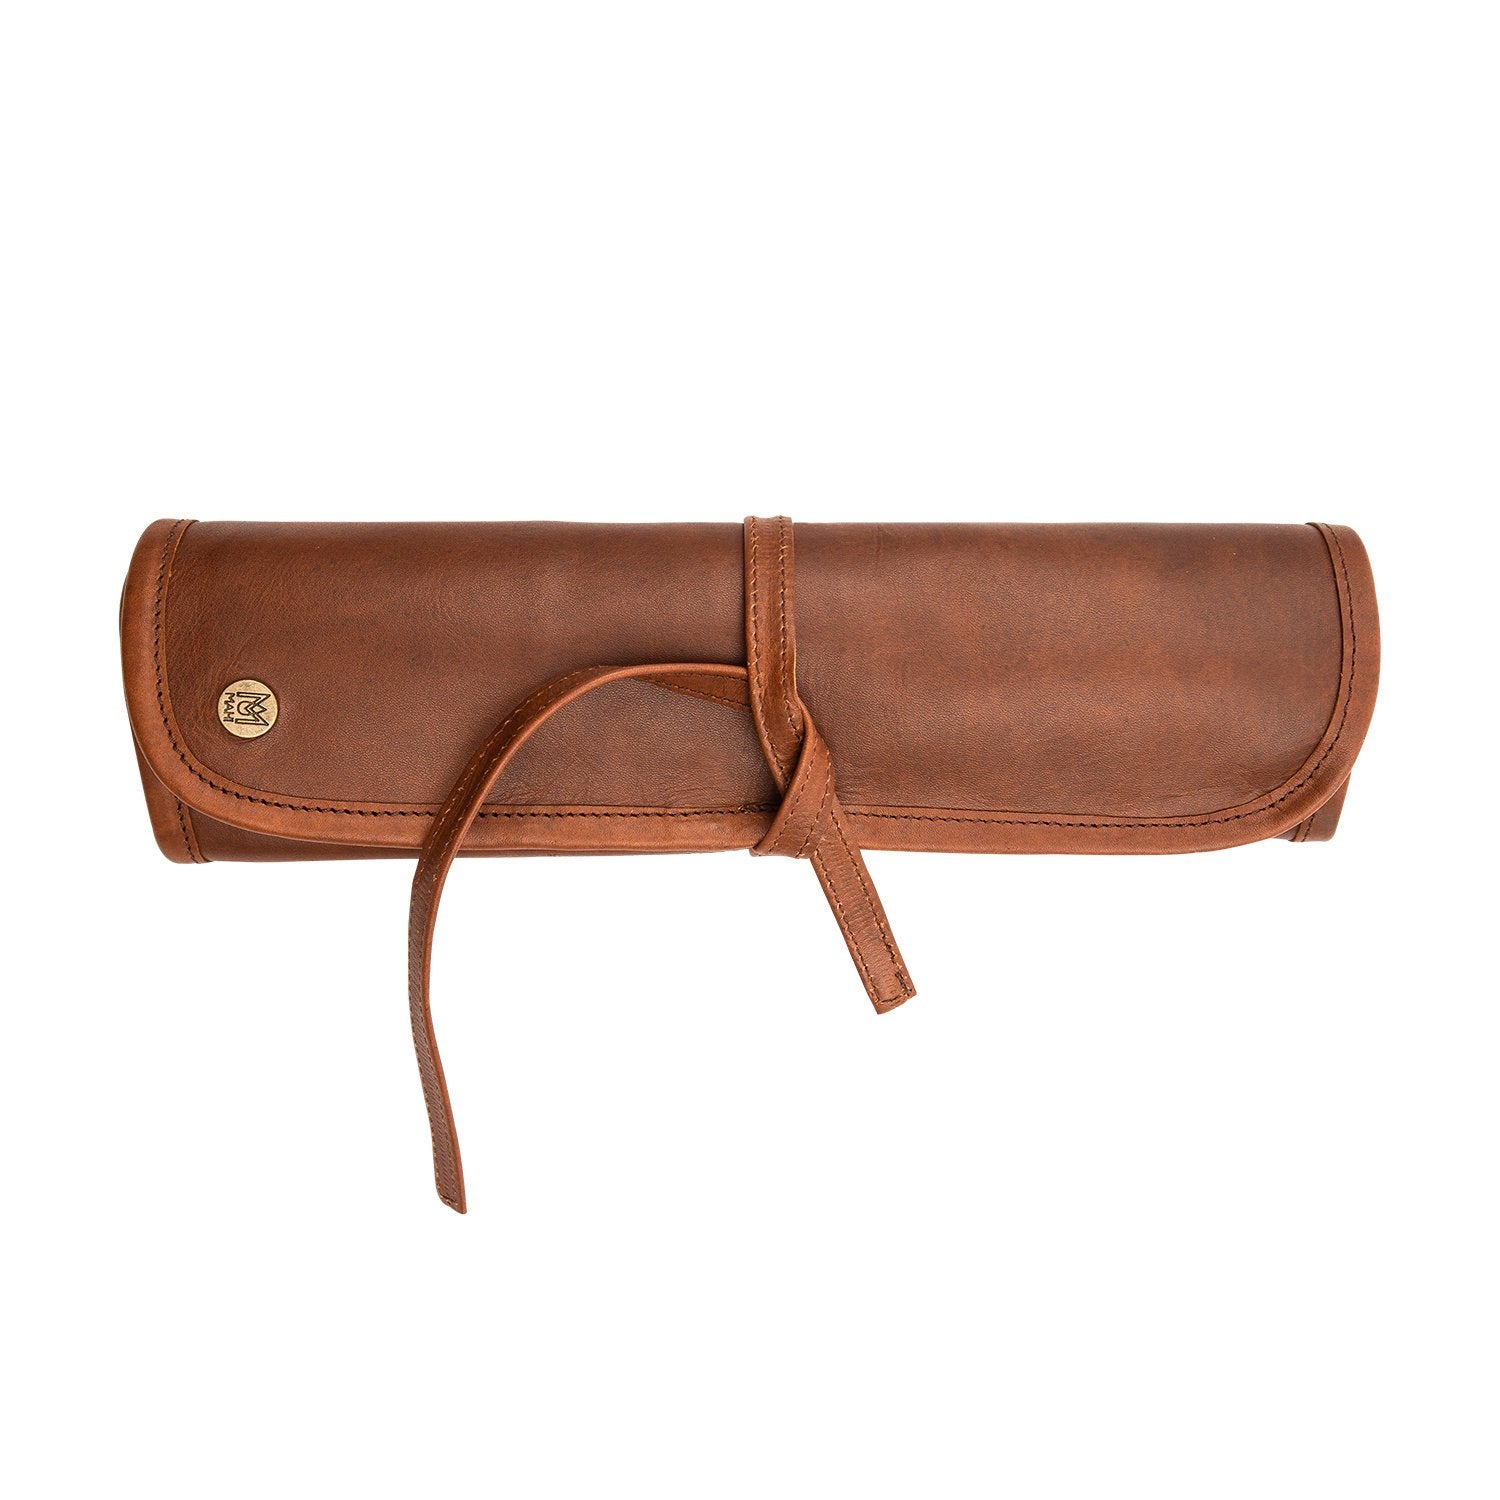 Leather Roll Artist Roll Leather Pencil Roll Leather Pencil 